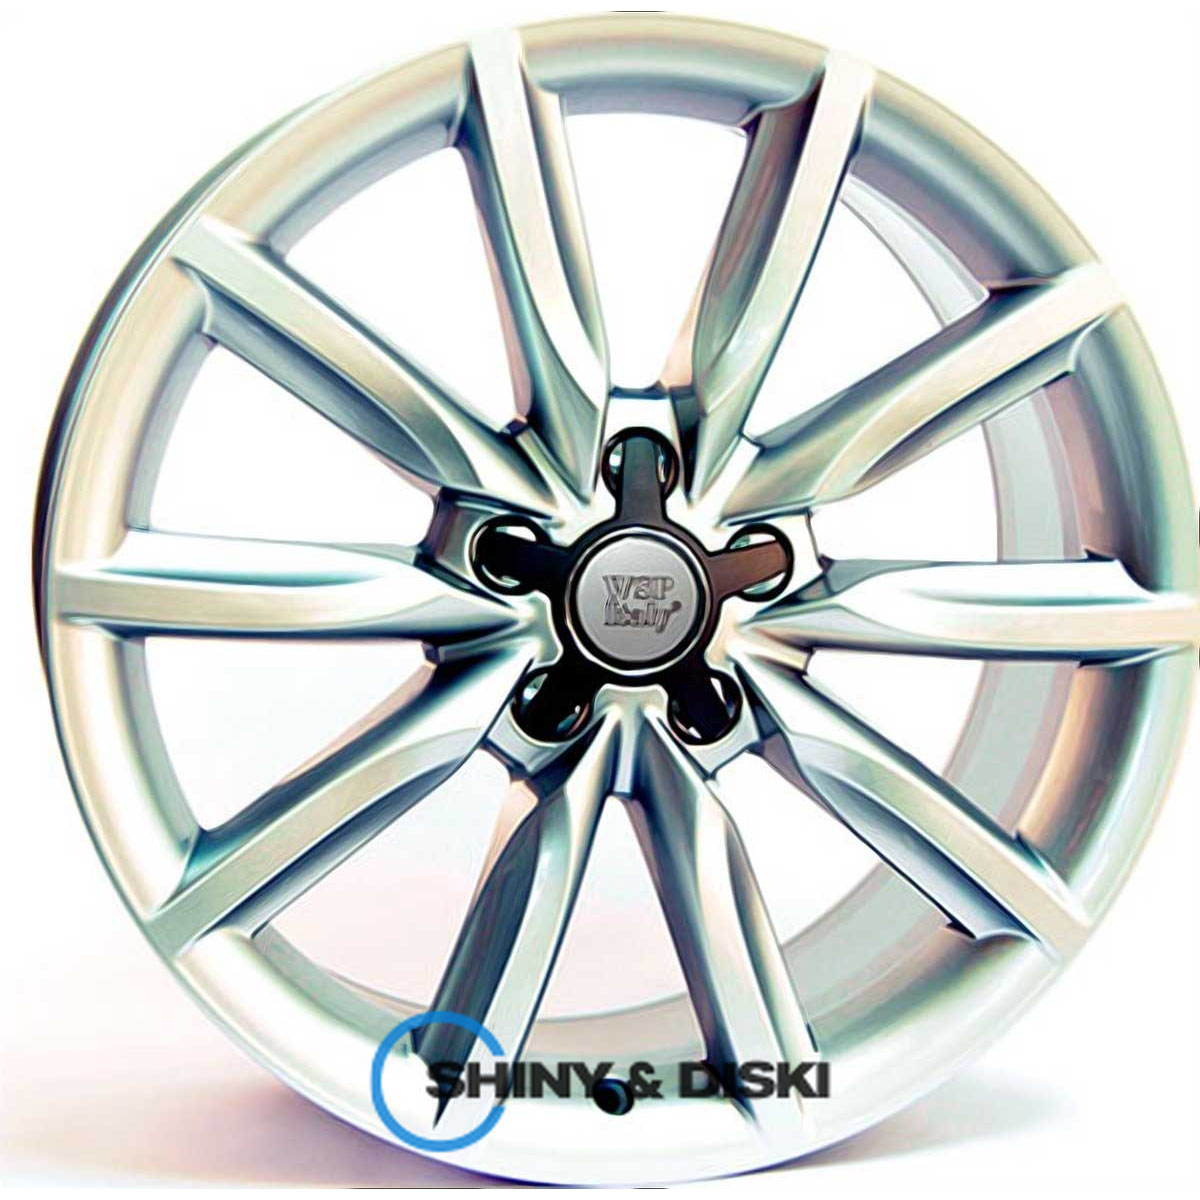 wsp italy audi w550 allroad canyon s r18 w8 pcd5x112 et35 dia57.1